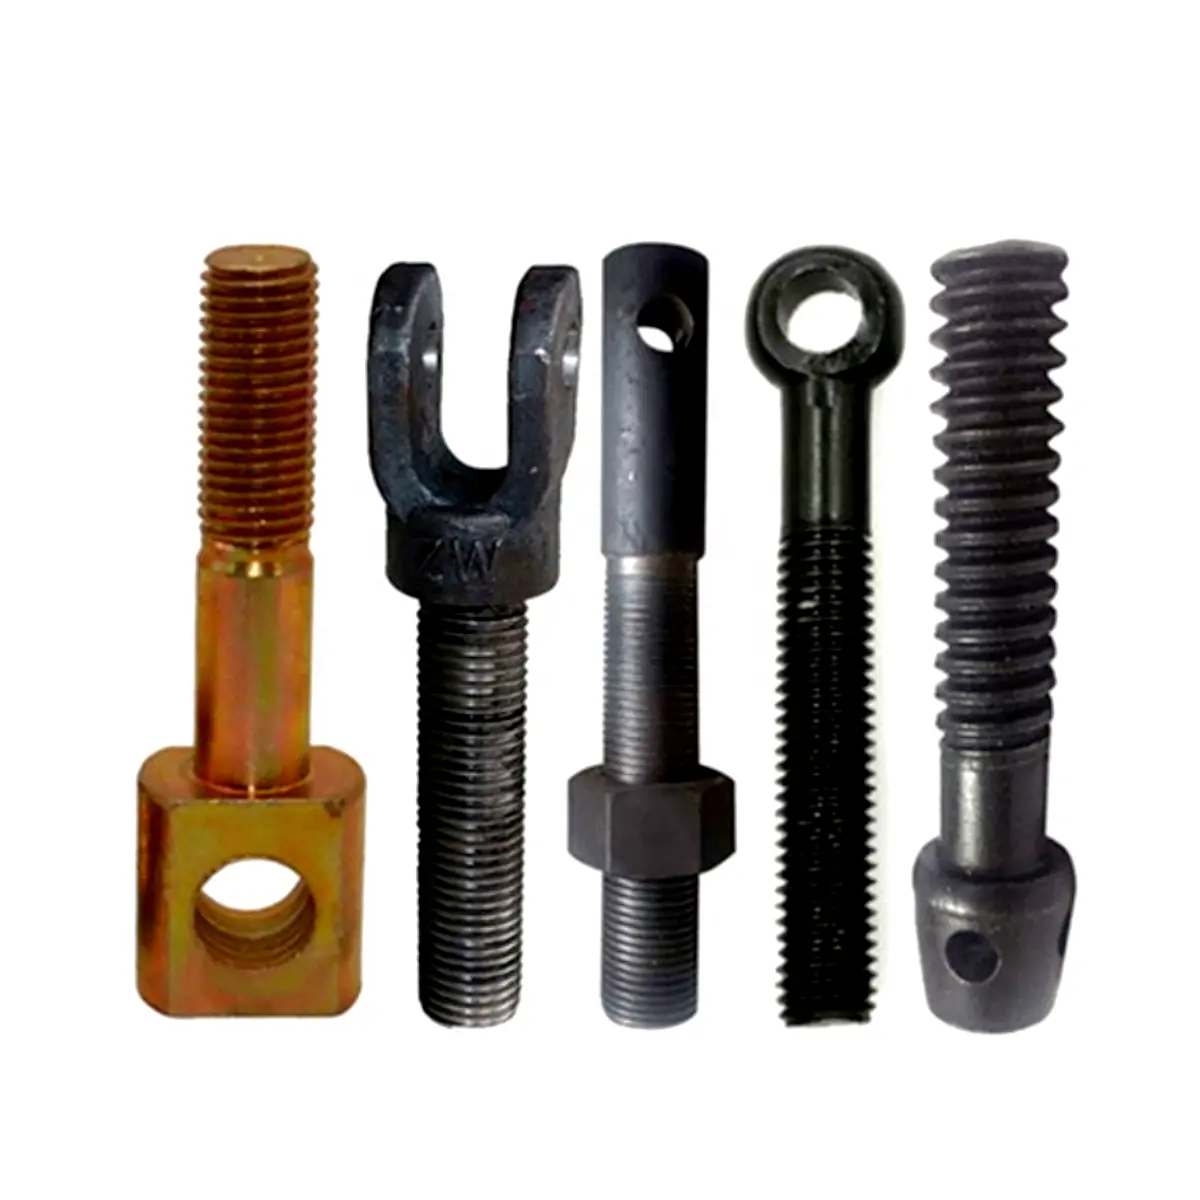 Special-shaped bolt non-standard bolt cold heading hot forging can be determined